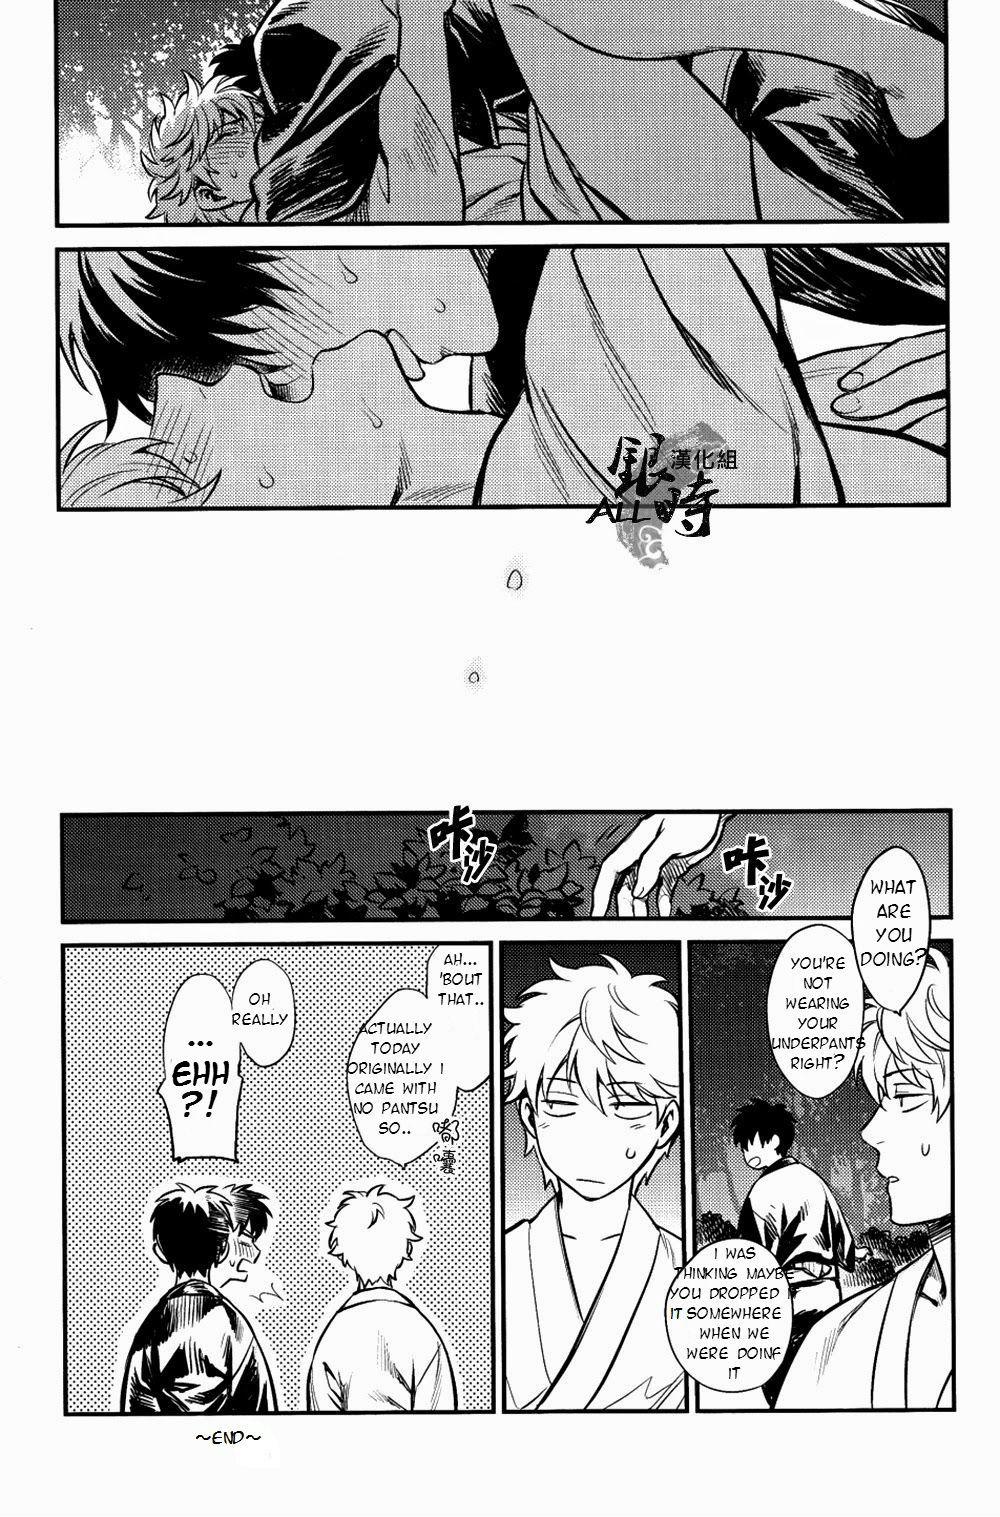 Swinger Please! Gintoki - Gintama And - Page 24